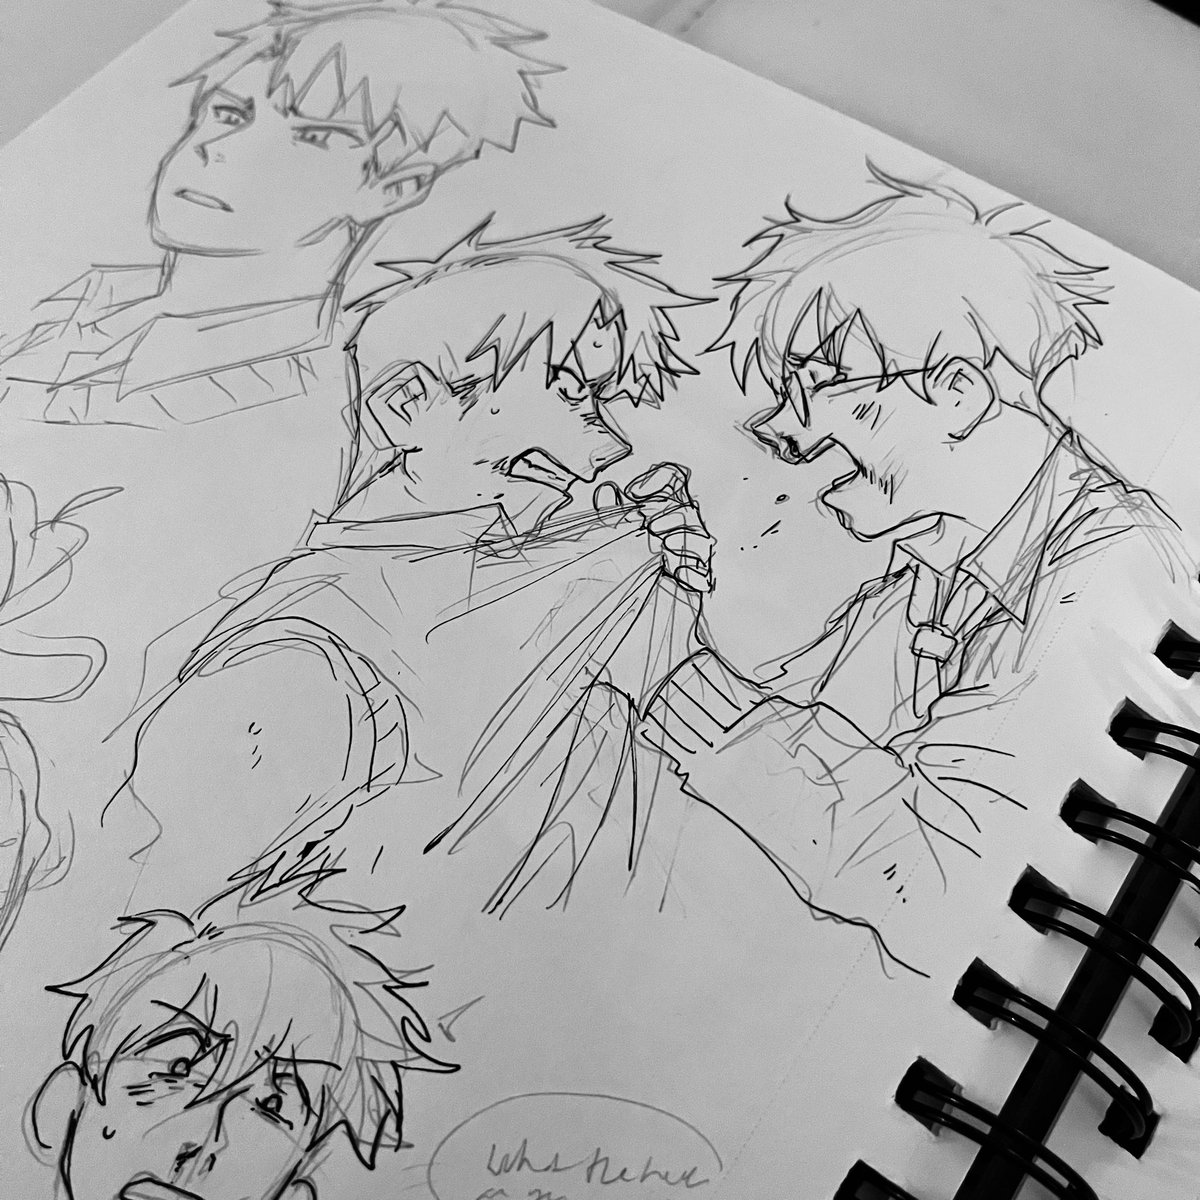 doodle dump - almost done with my 45th sketchbook! Can't wait to share some snippets  #oc #fanart 